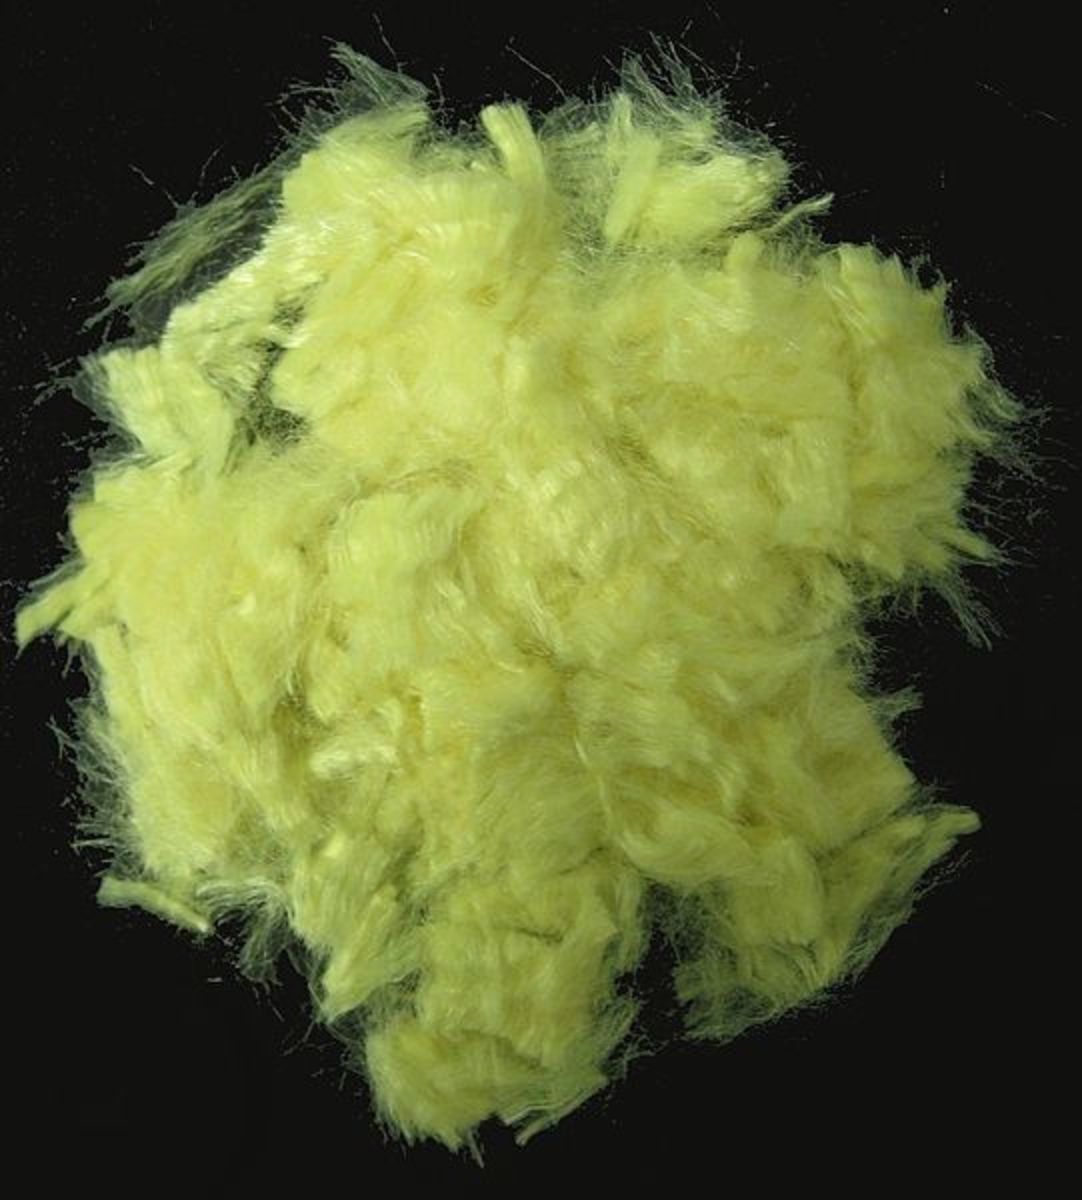 Golden yellow aramid fiber (Kevlar). The diameter of the filaments is about 10 µm. Melting point: none (does not melt). Decomposition temperature: 500-550 °C. Decomposition temperature in air: 427-482 °C (800-900 °F).